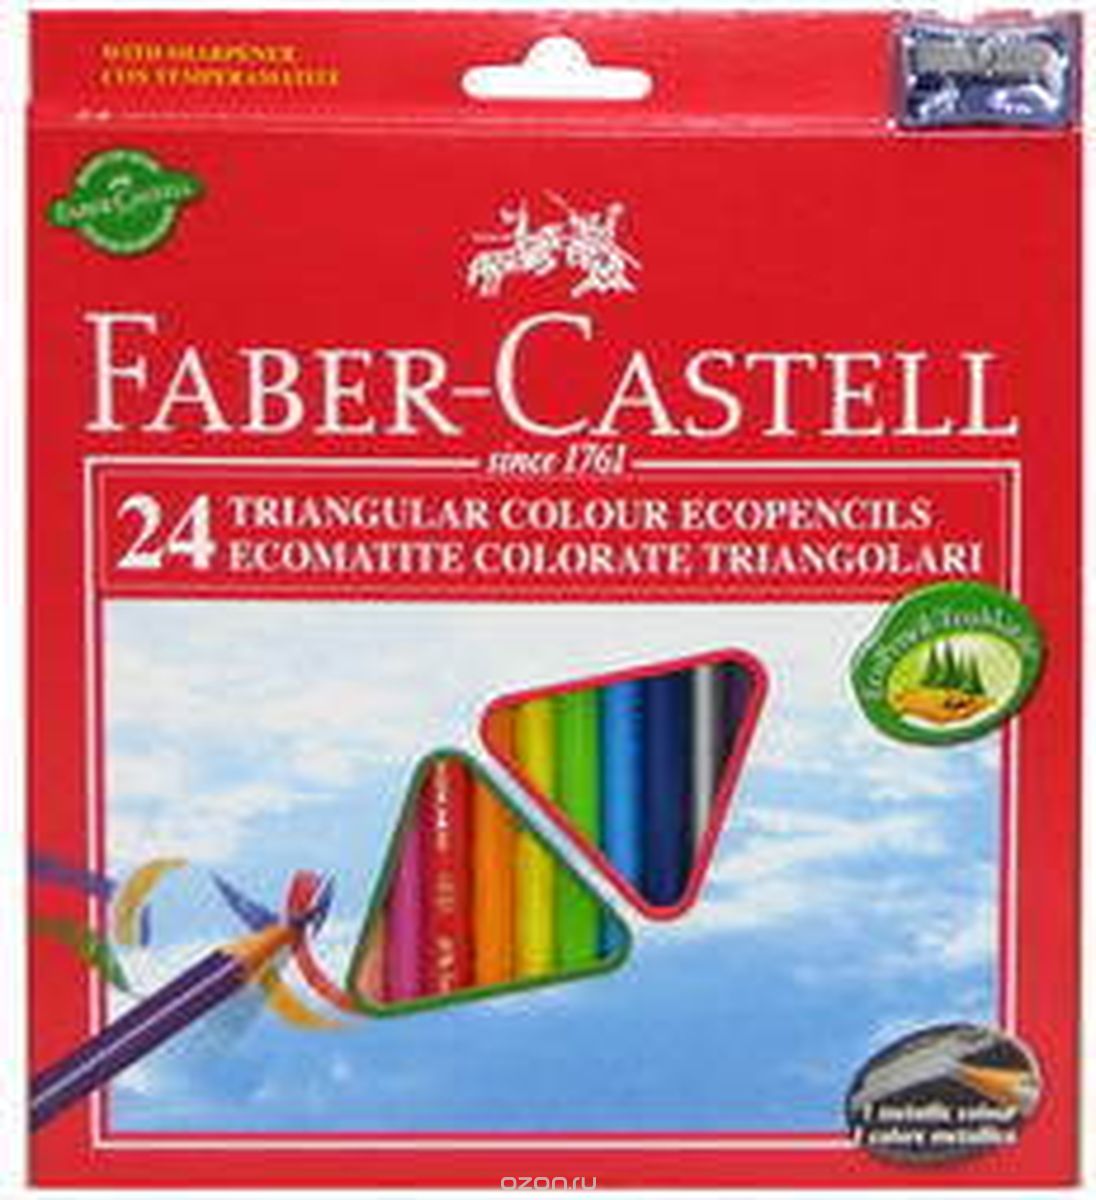 Faber-Castell    Eco   24 